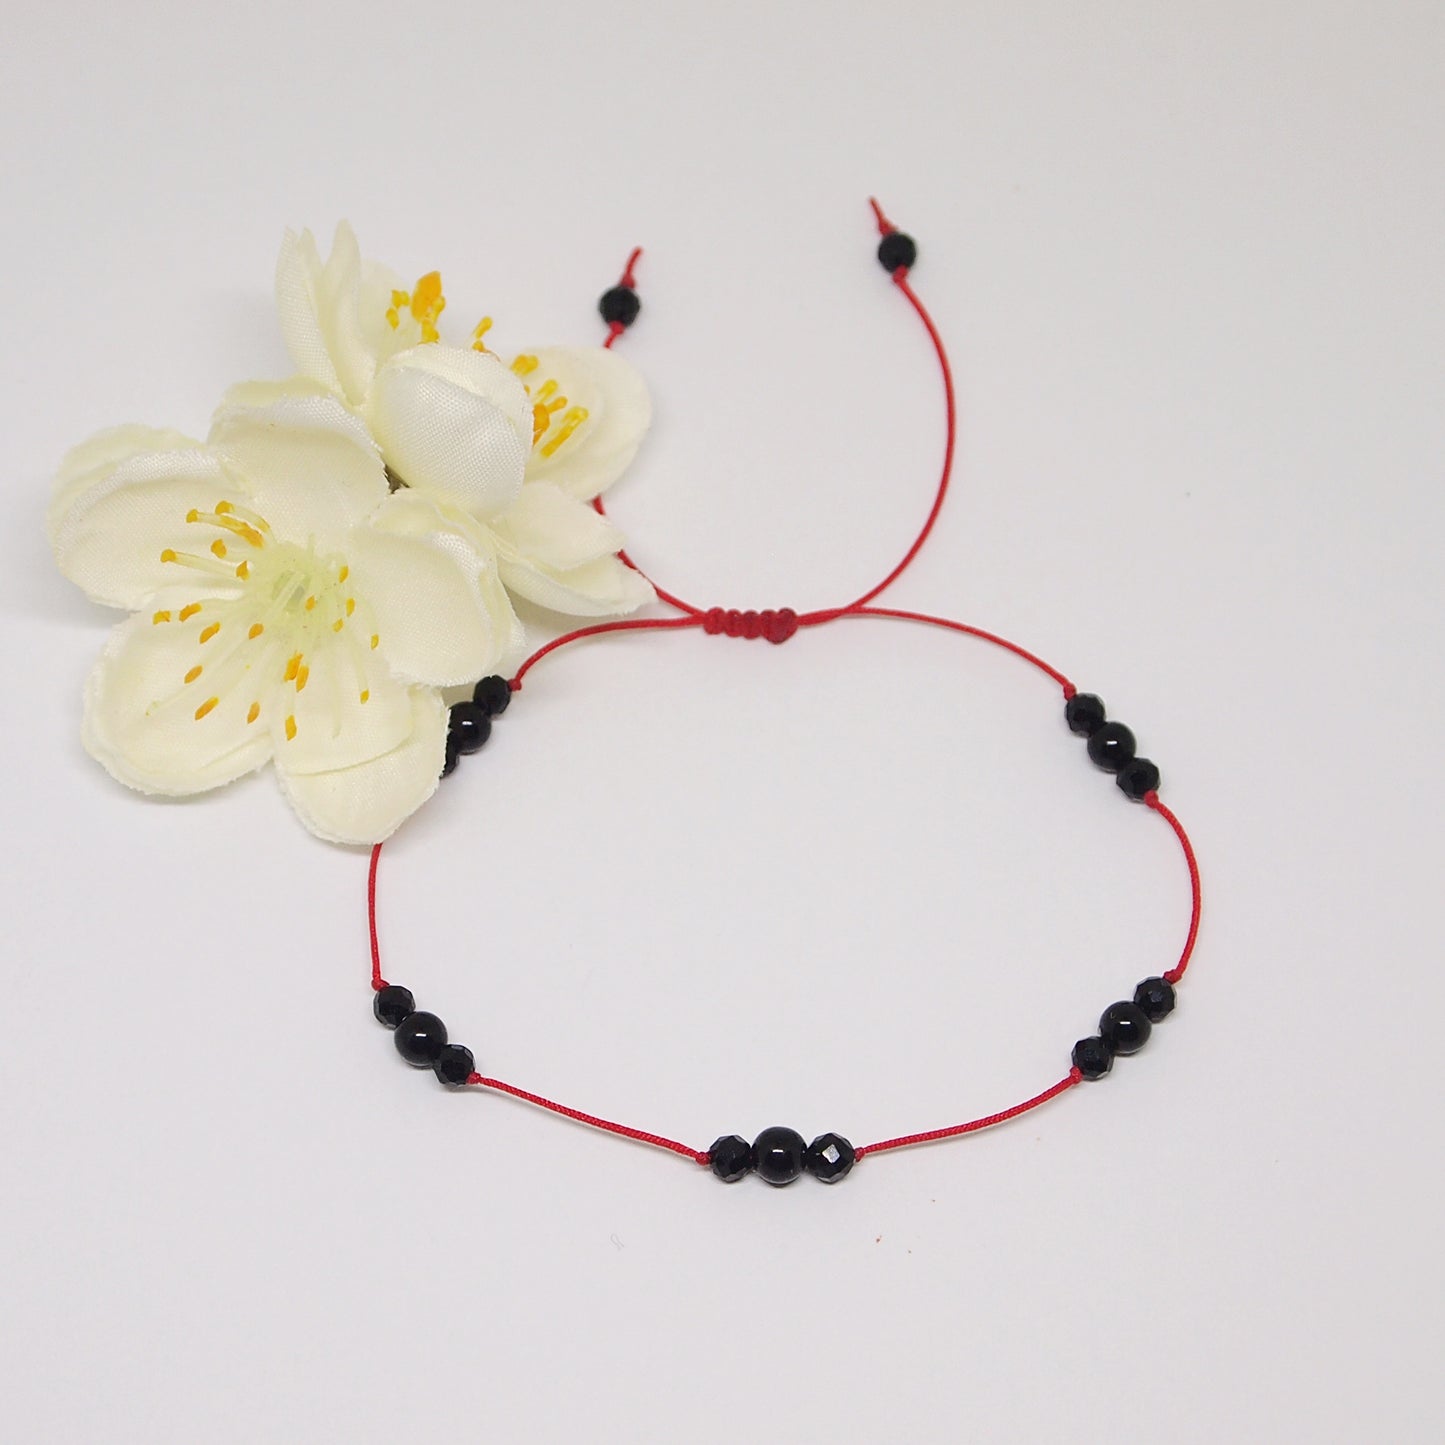 red thread bracelet with black tourmaline for protection